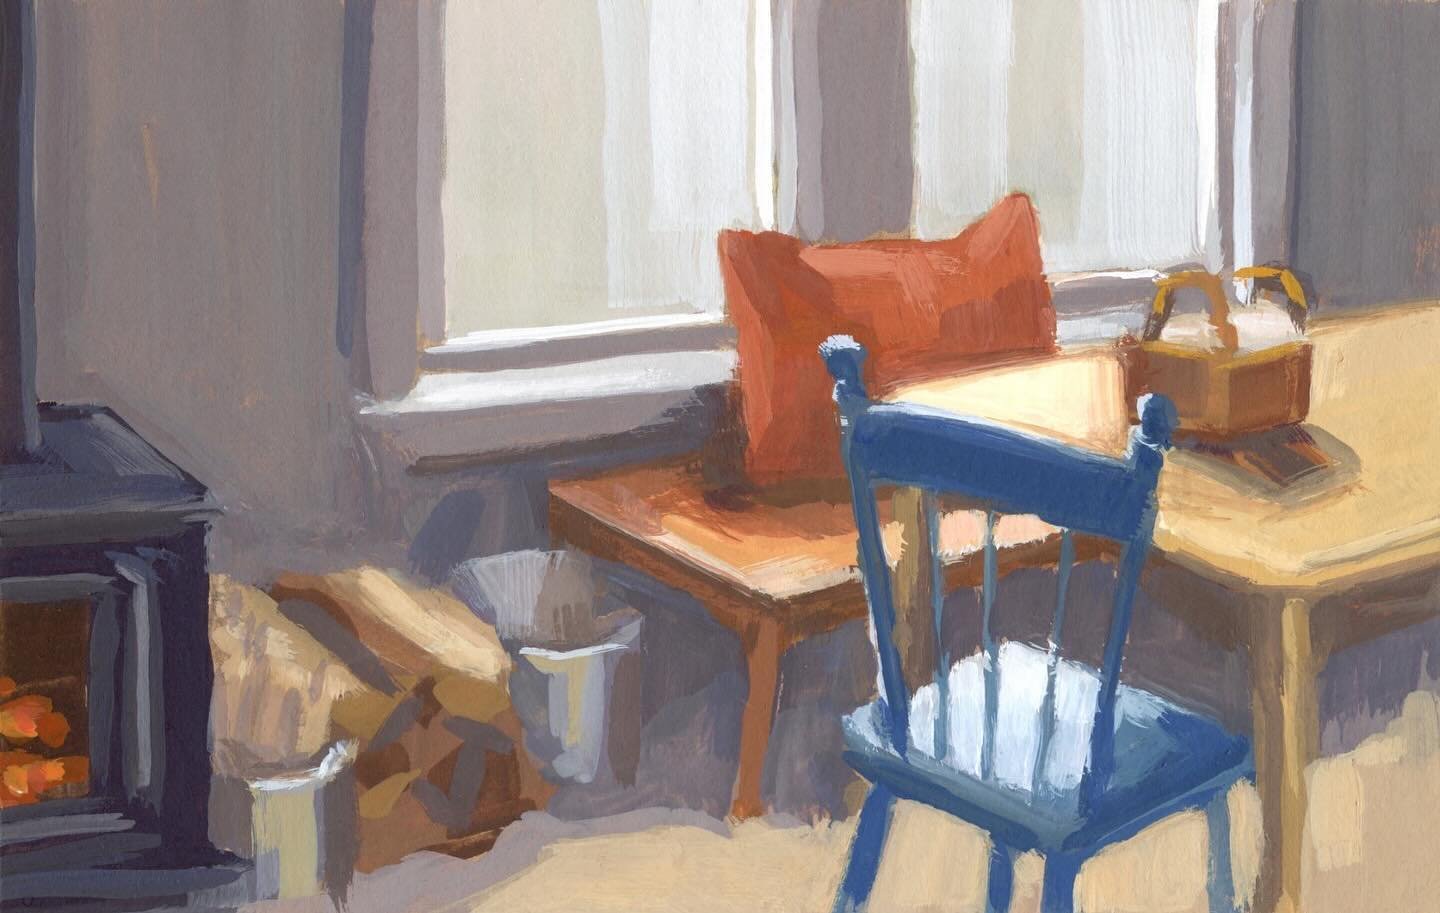 I love creating paintings of everyday scenes around the house. This is the dining room on an overcast morning. The wood stove was crackling brightly. 

This painting was made using just a few tools and a simple process that I shared on the blog along